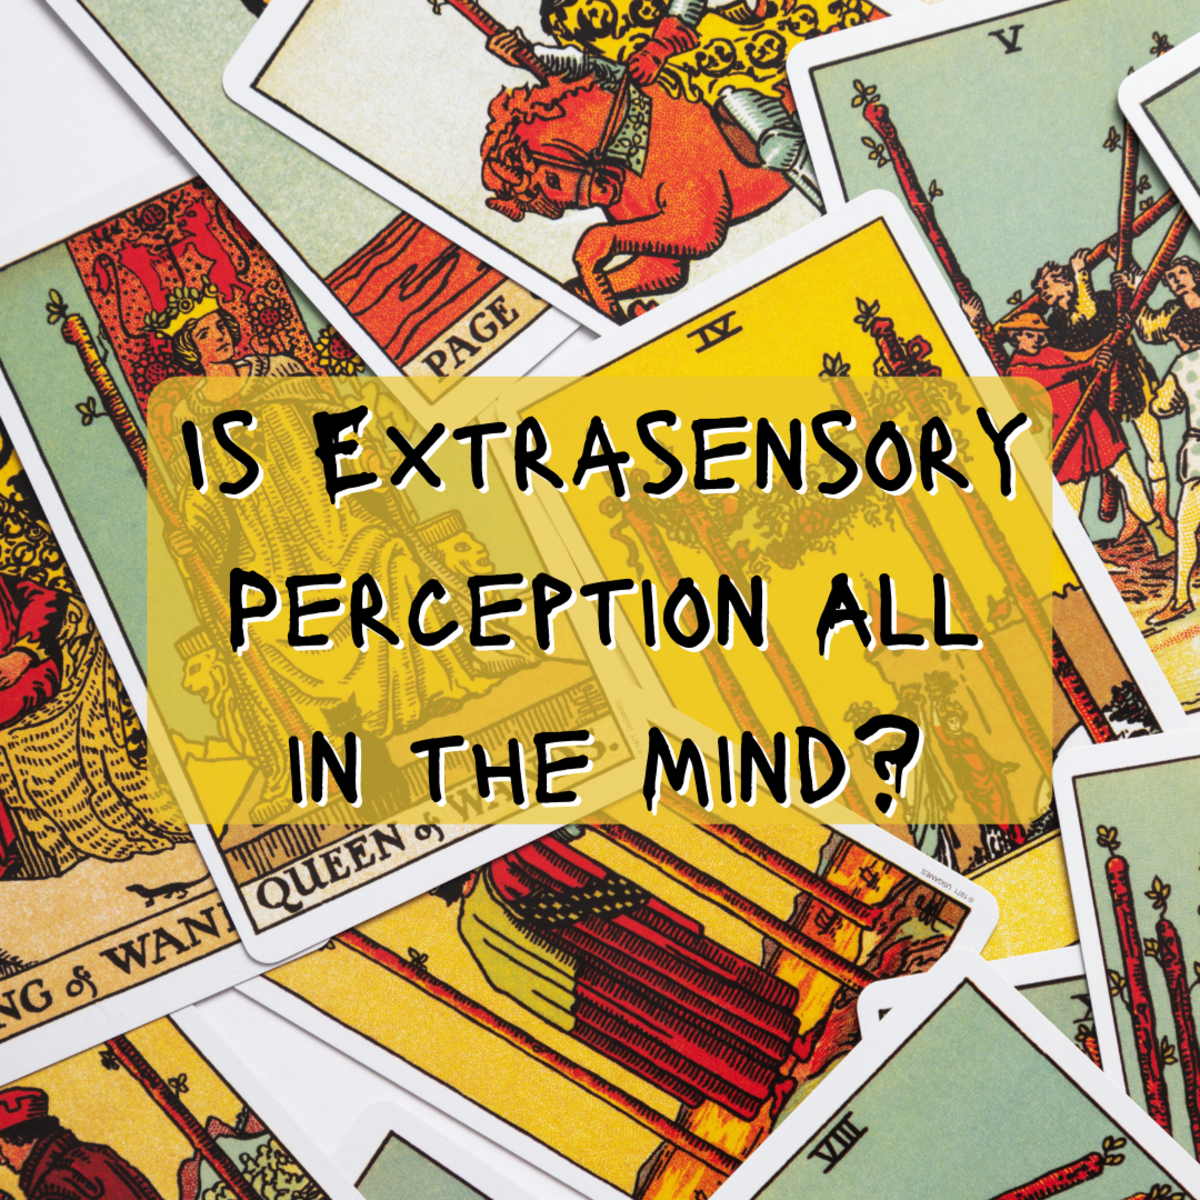 Is Extrasensory Perception Real or All in the Mind?